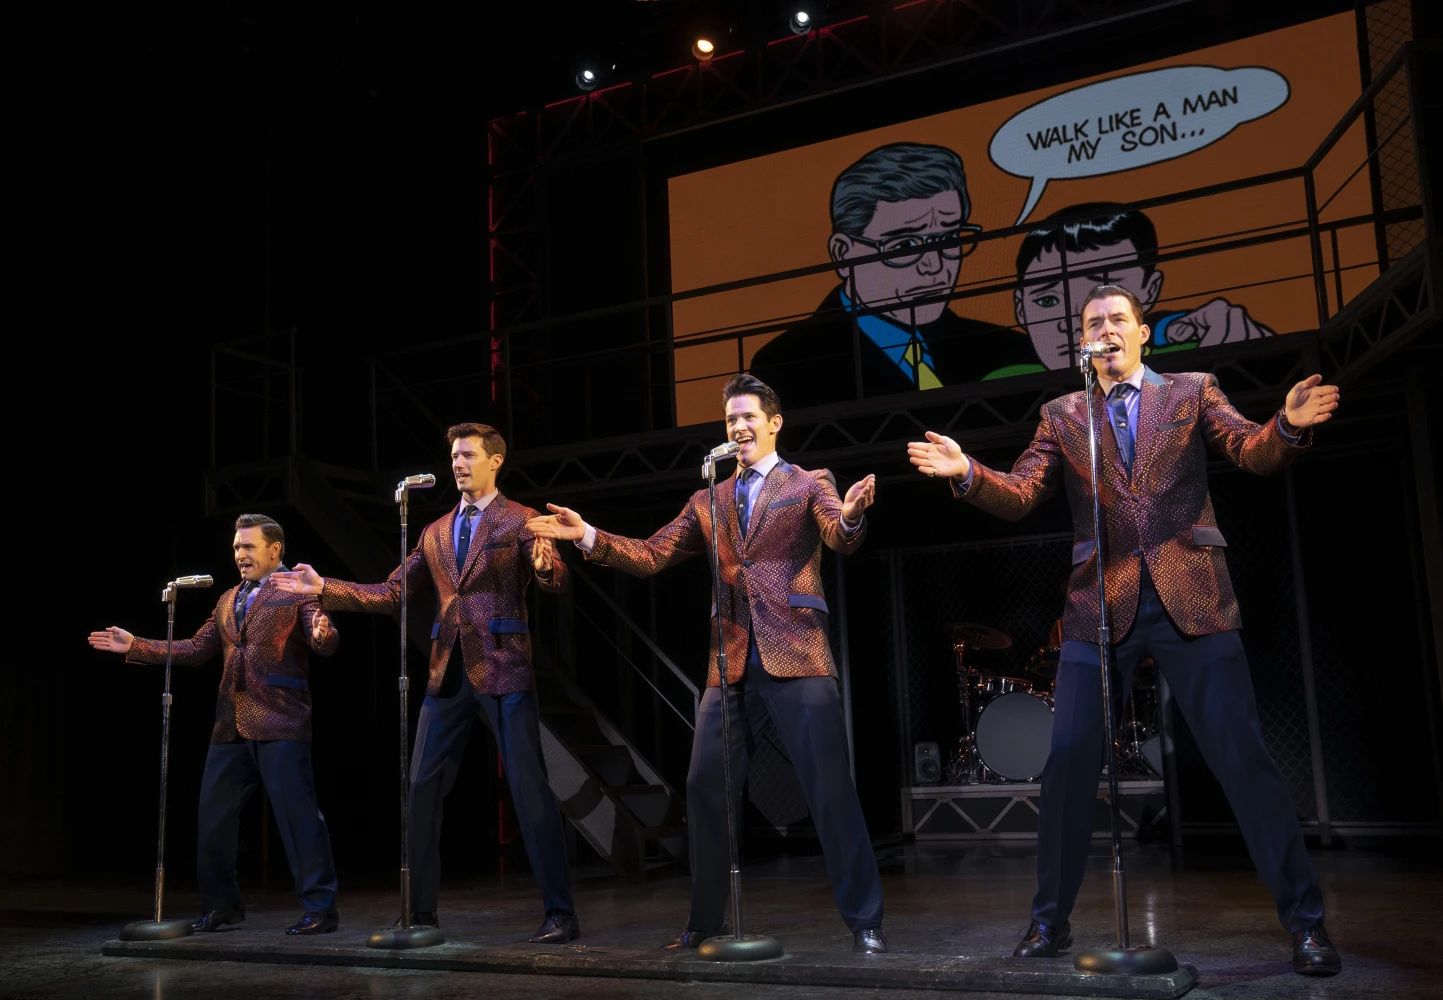 Jersey Boys: What to expect - 7